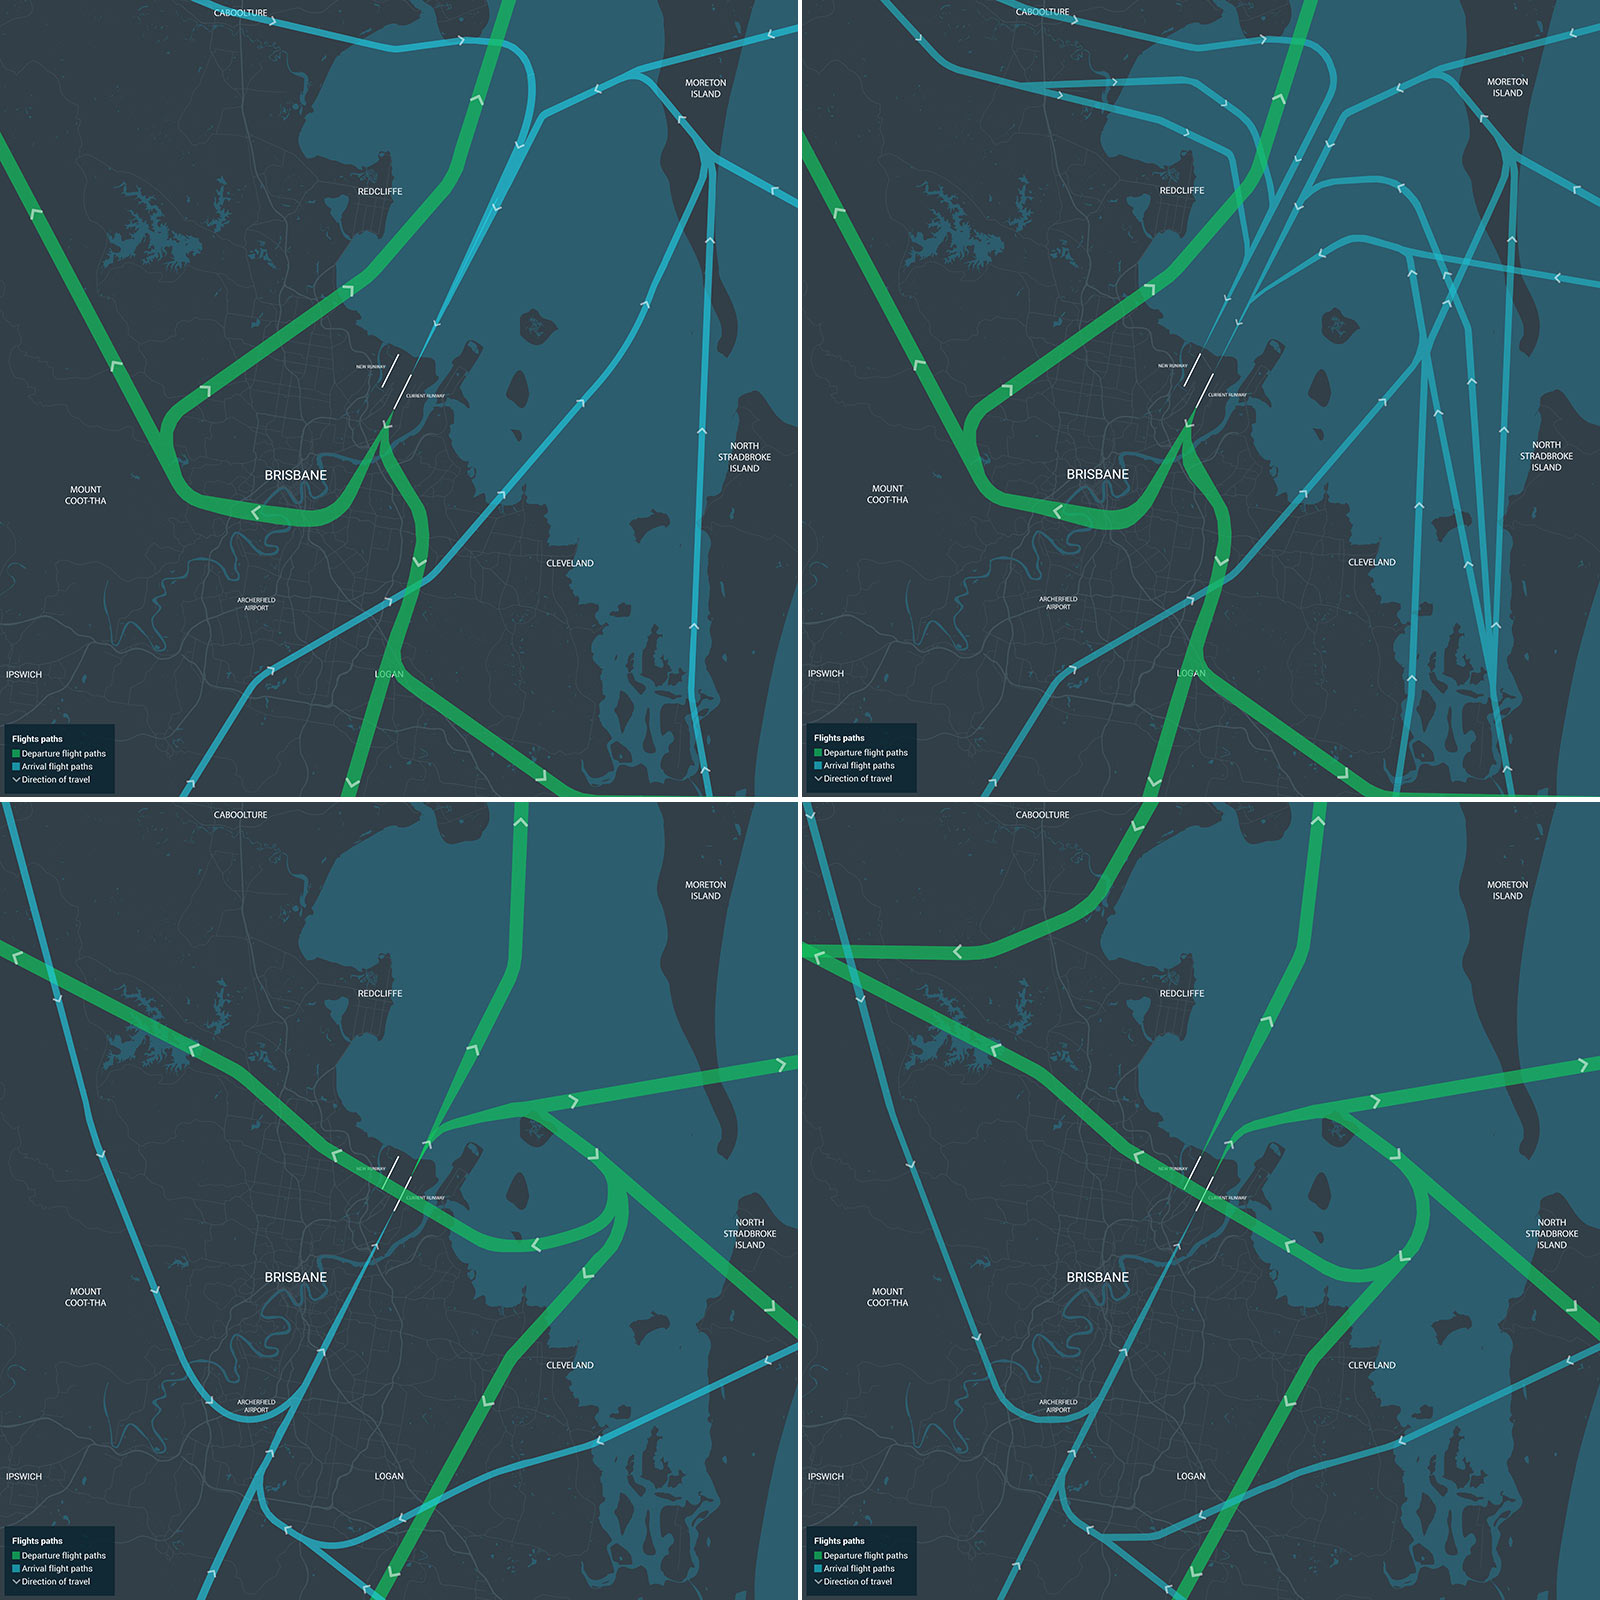 Top left: Southerly interim | Top right: Southerly new | Bottom left: Northerly interim | Bottom right: Northerly new